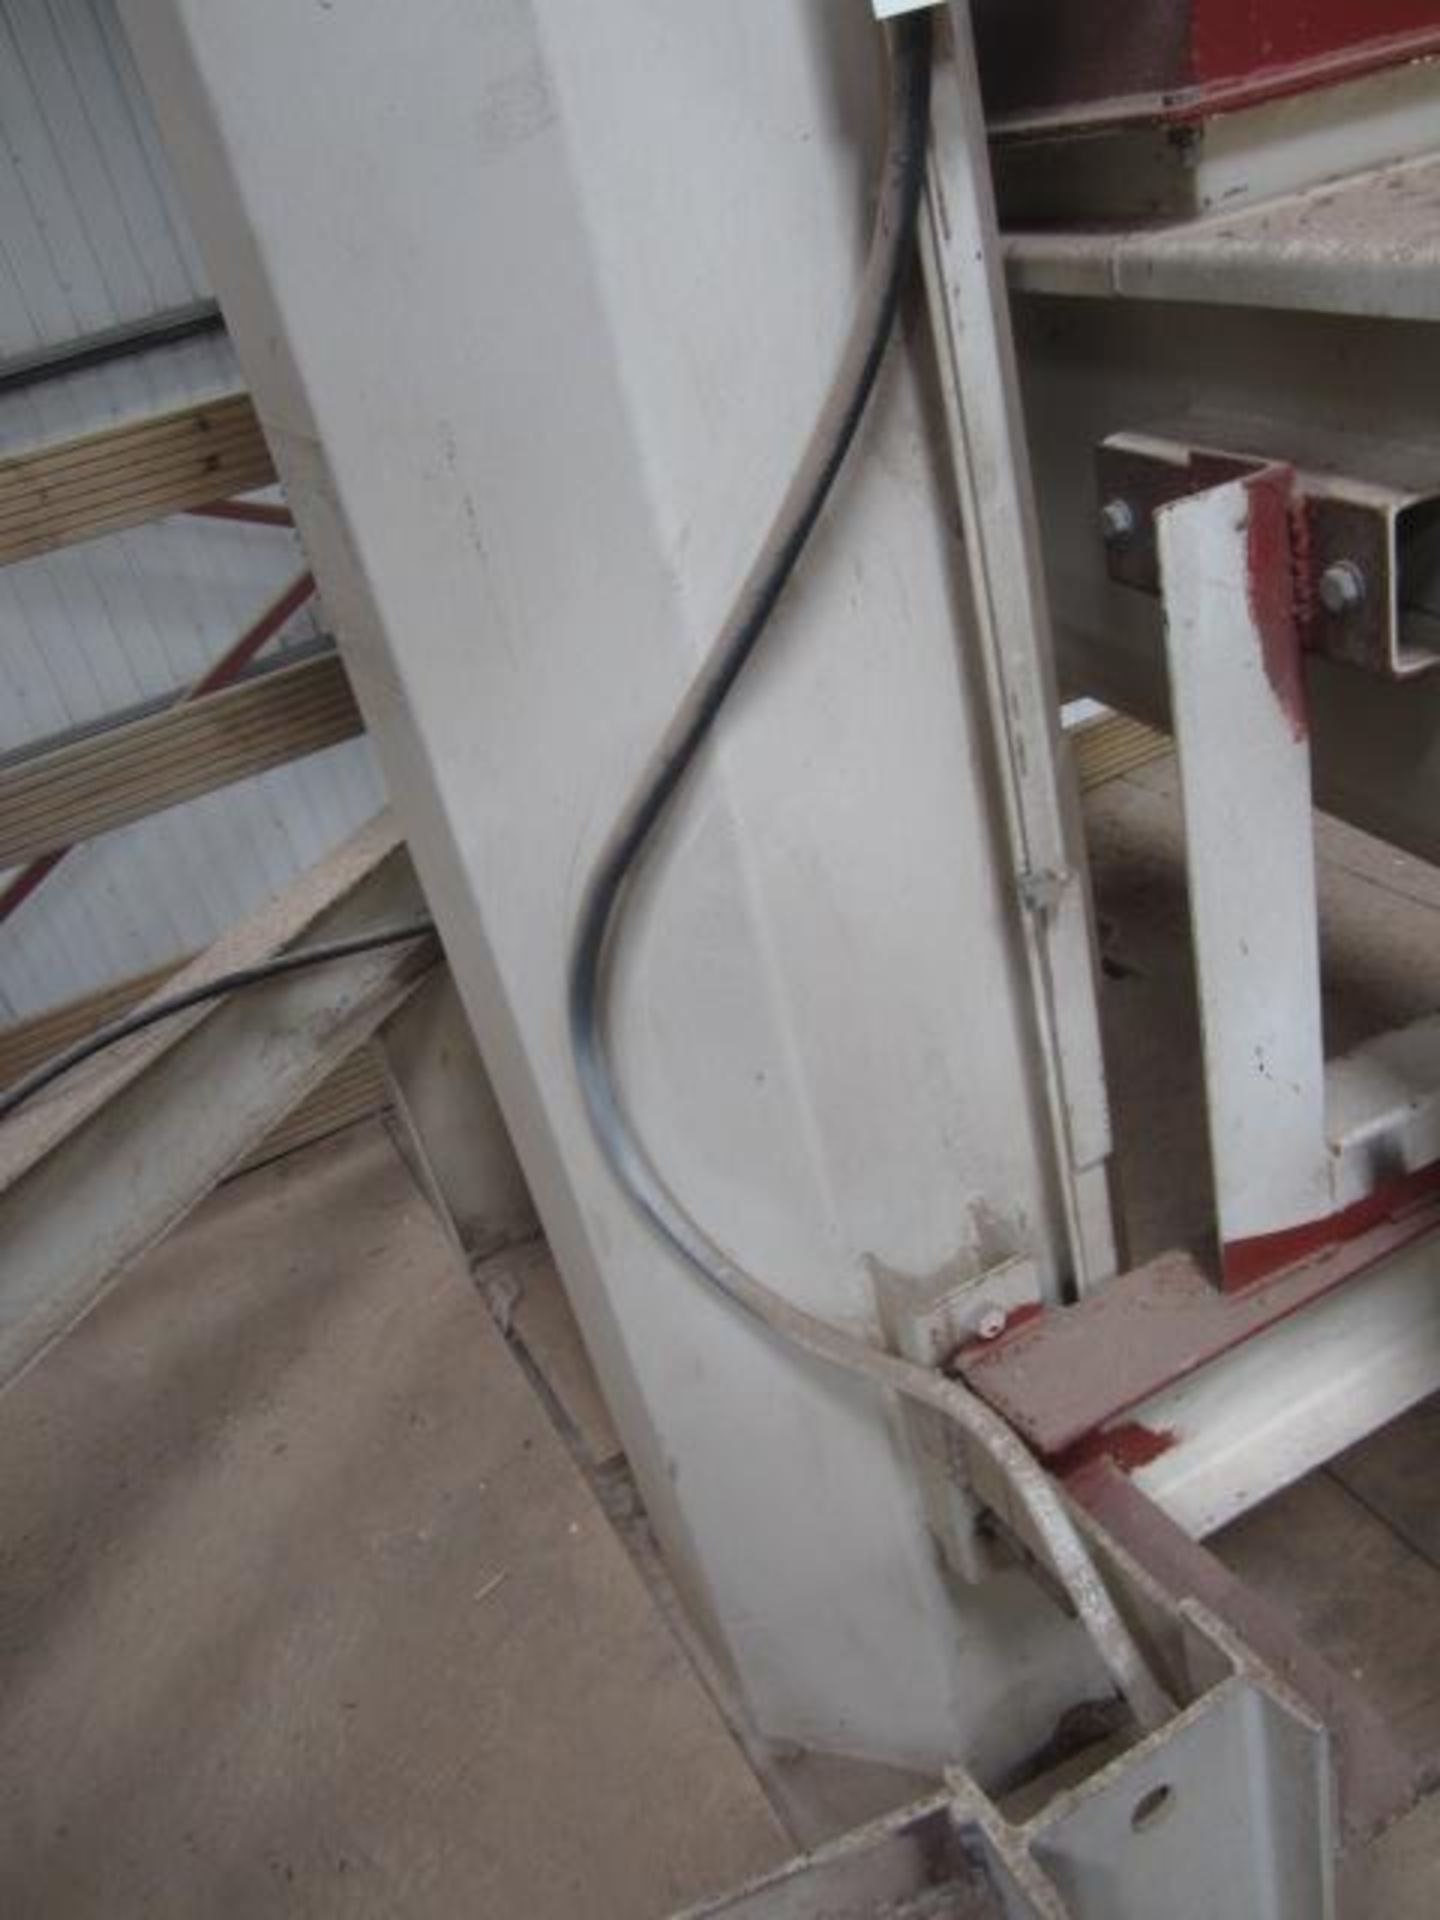 PST V8420 vertical auger screw conveyor, height approx. 8m x 400mm dia, serial no: 1031U16 (2010), - Image 2 of 5